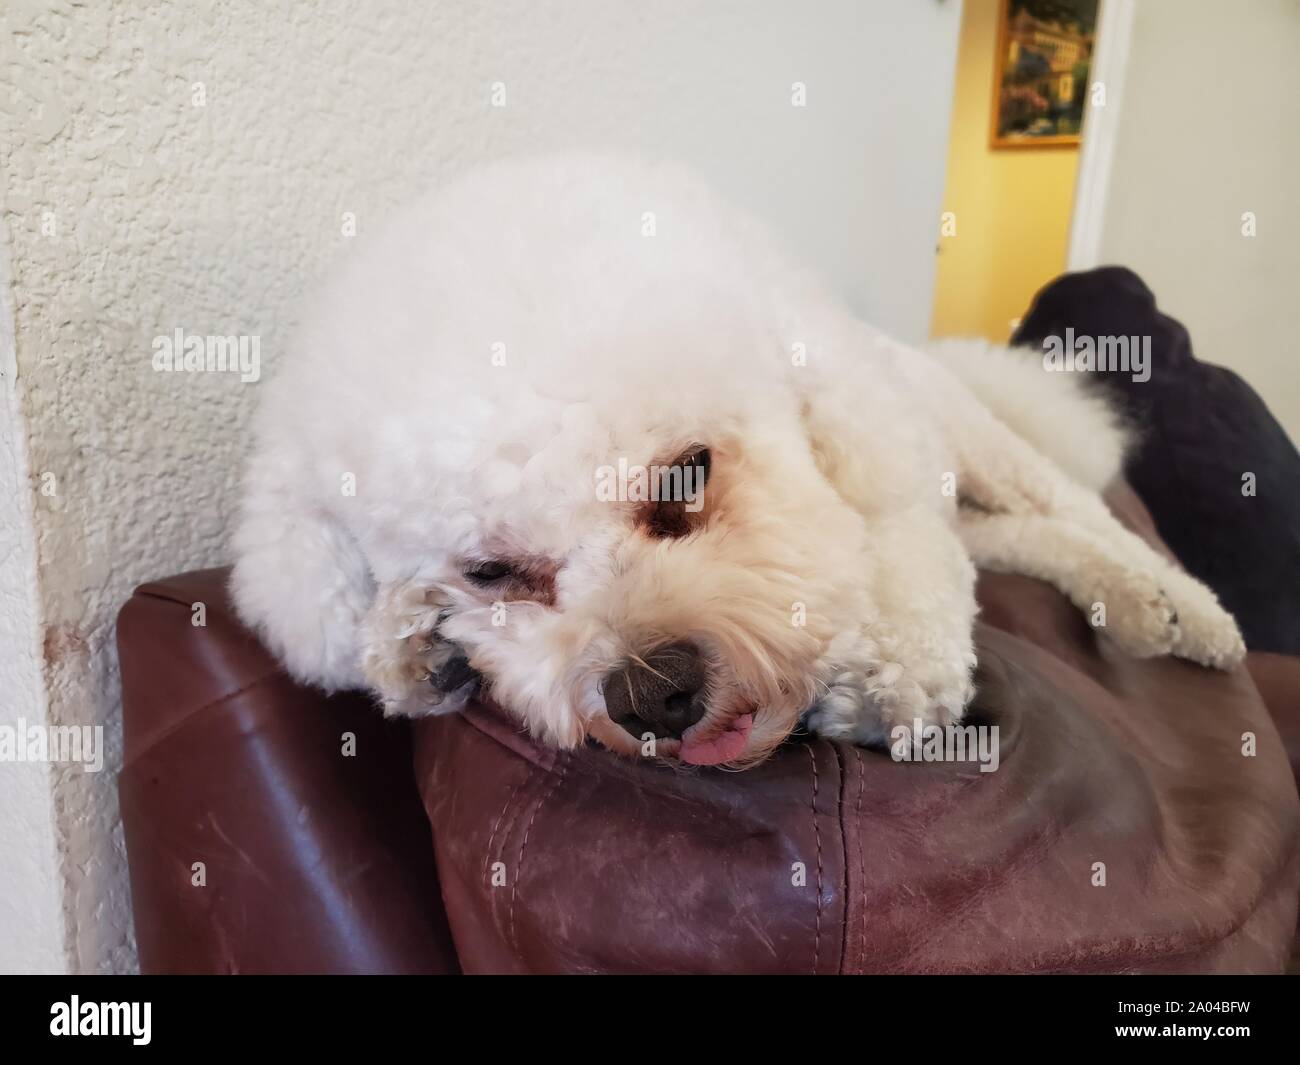 Close-up of a cute Bichon Frise dog looking at the camera and relaxing in an domestic room, September 17, 2019 Stock Photo